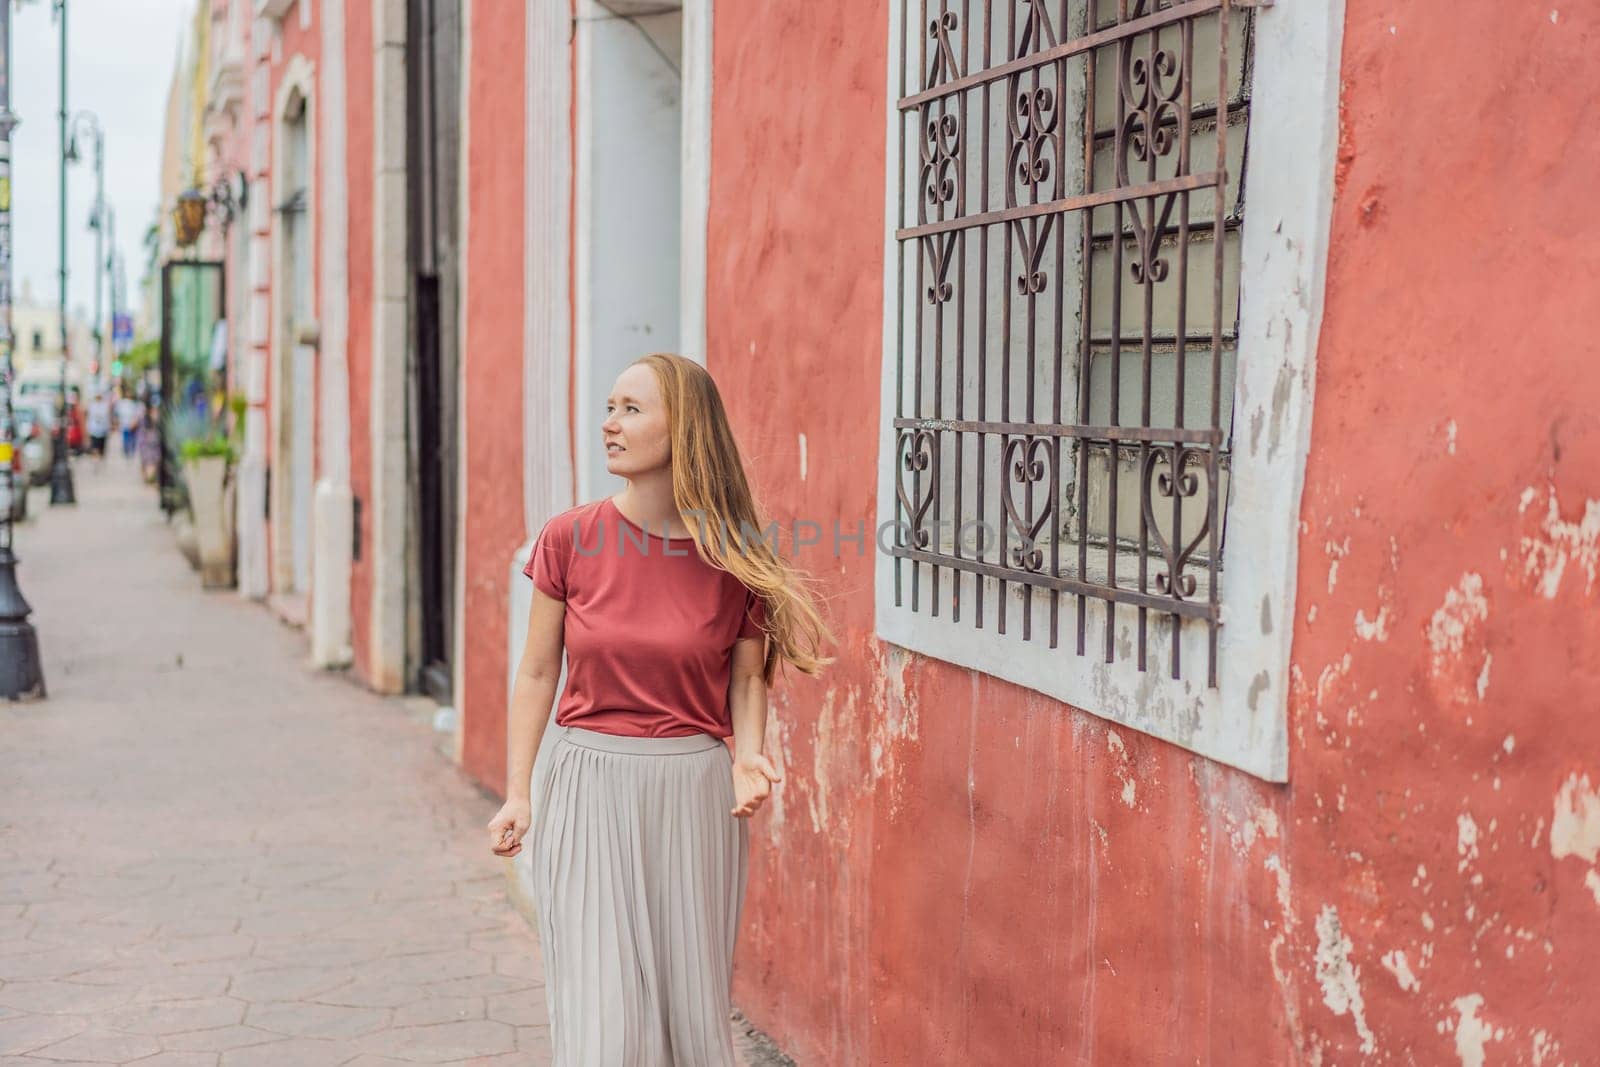 Woman tourist explores the vibrant streets of Valladolid, Mexico, immersing herself in the rich culture and colorful architecture of this charming colonial town.